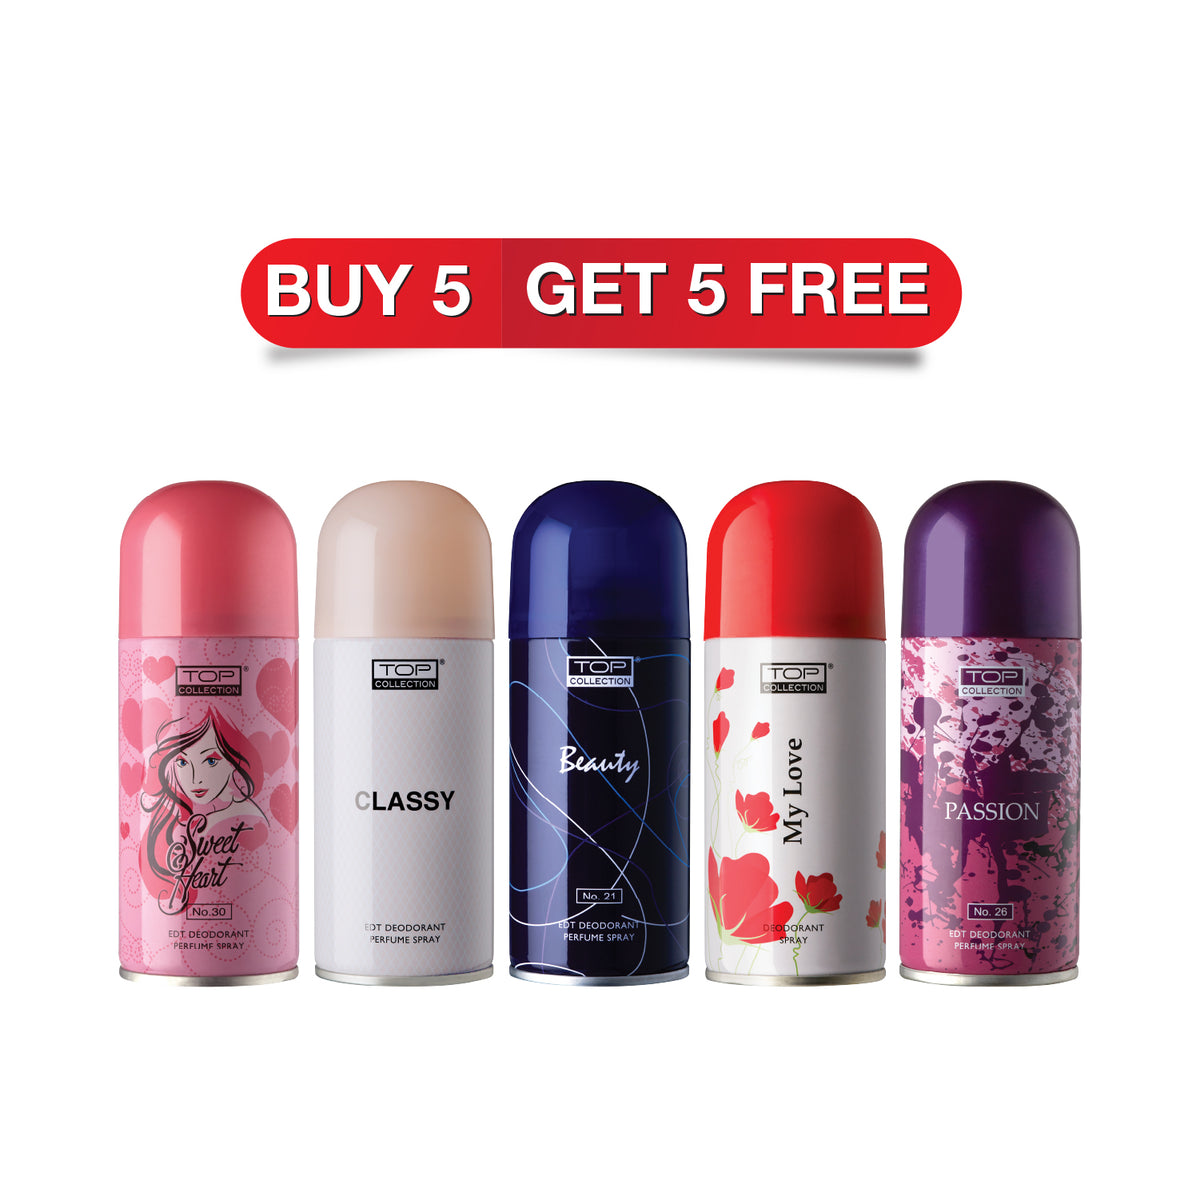 Top Collection Deodorant Perfume Spray Combo Offer 2 (GET 1 FREE)